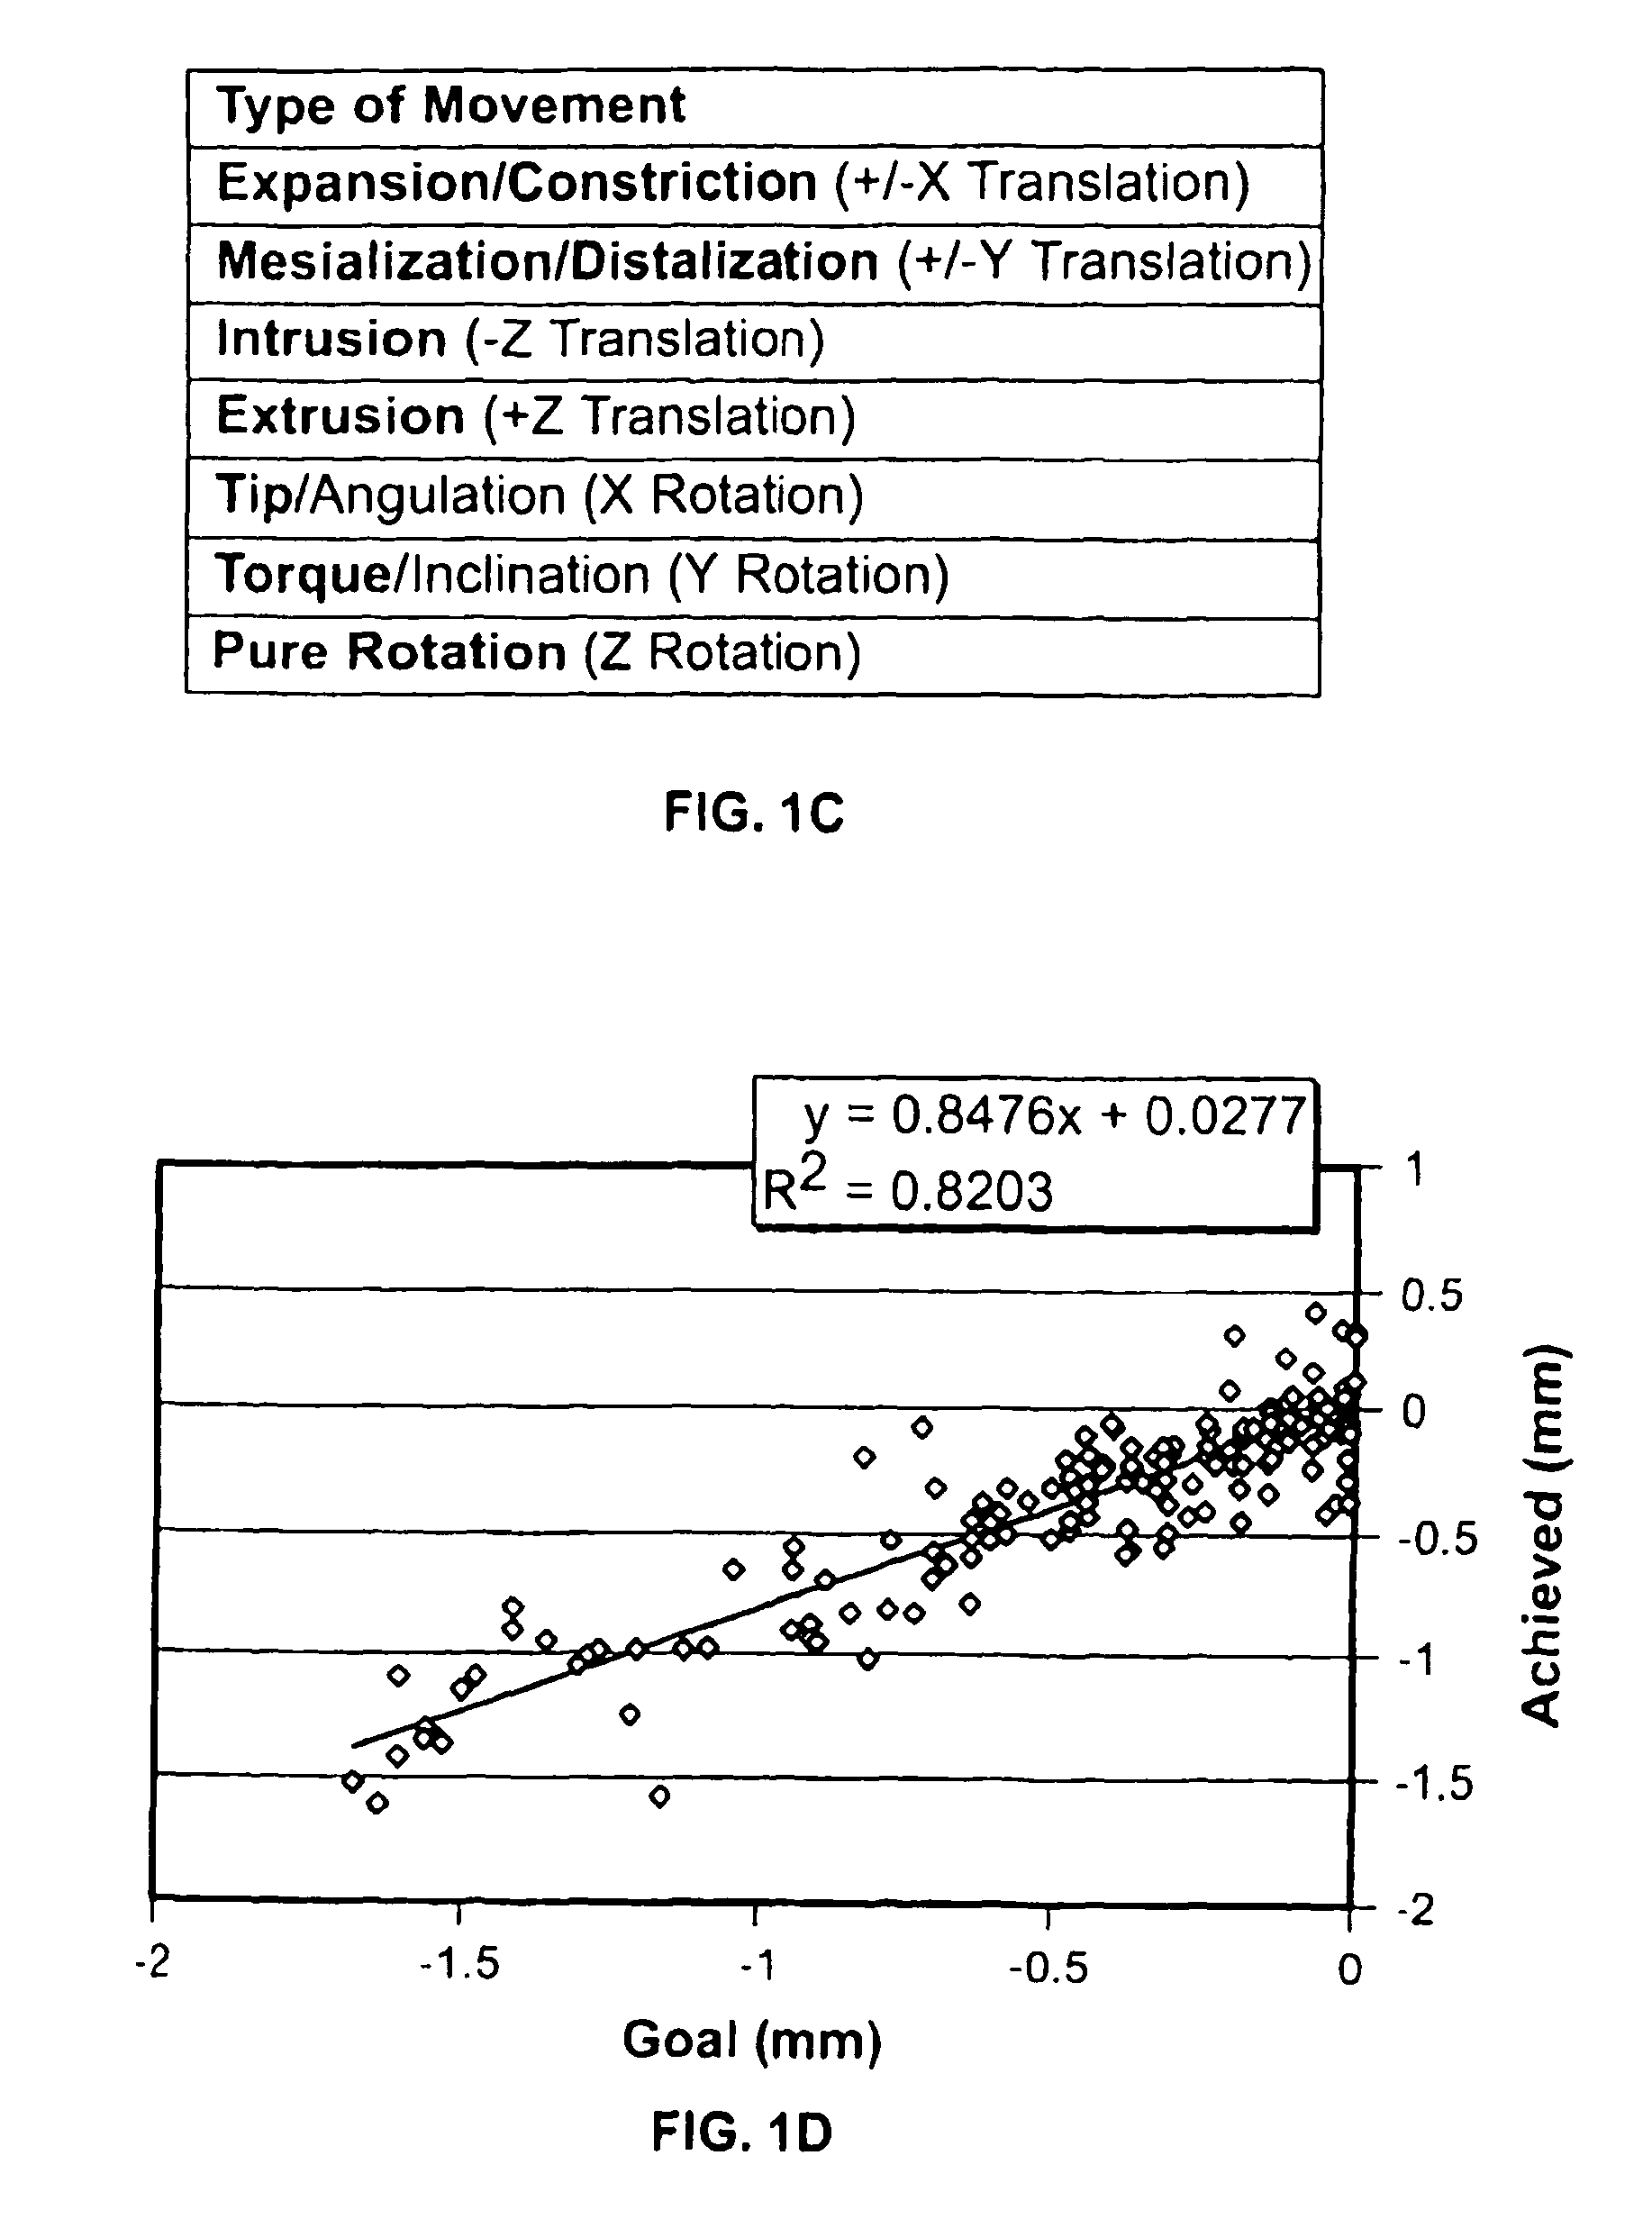 Method and system for providing dynamic orthodontic assessment and treatment profiles